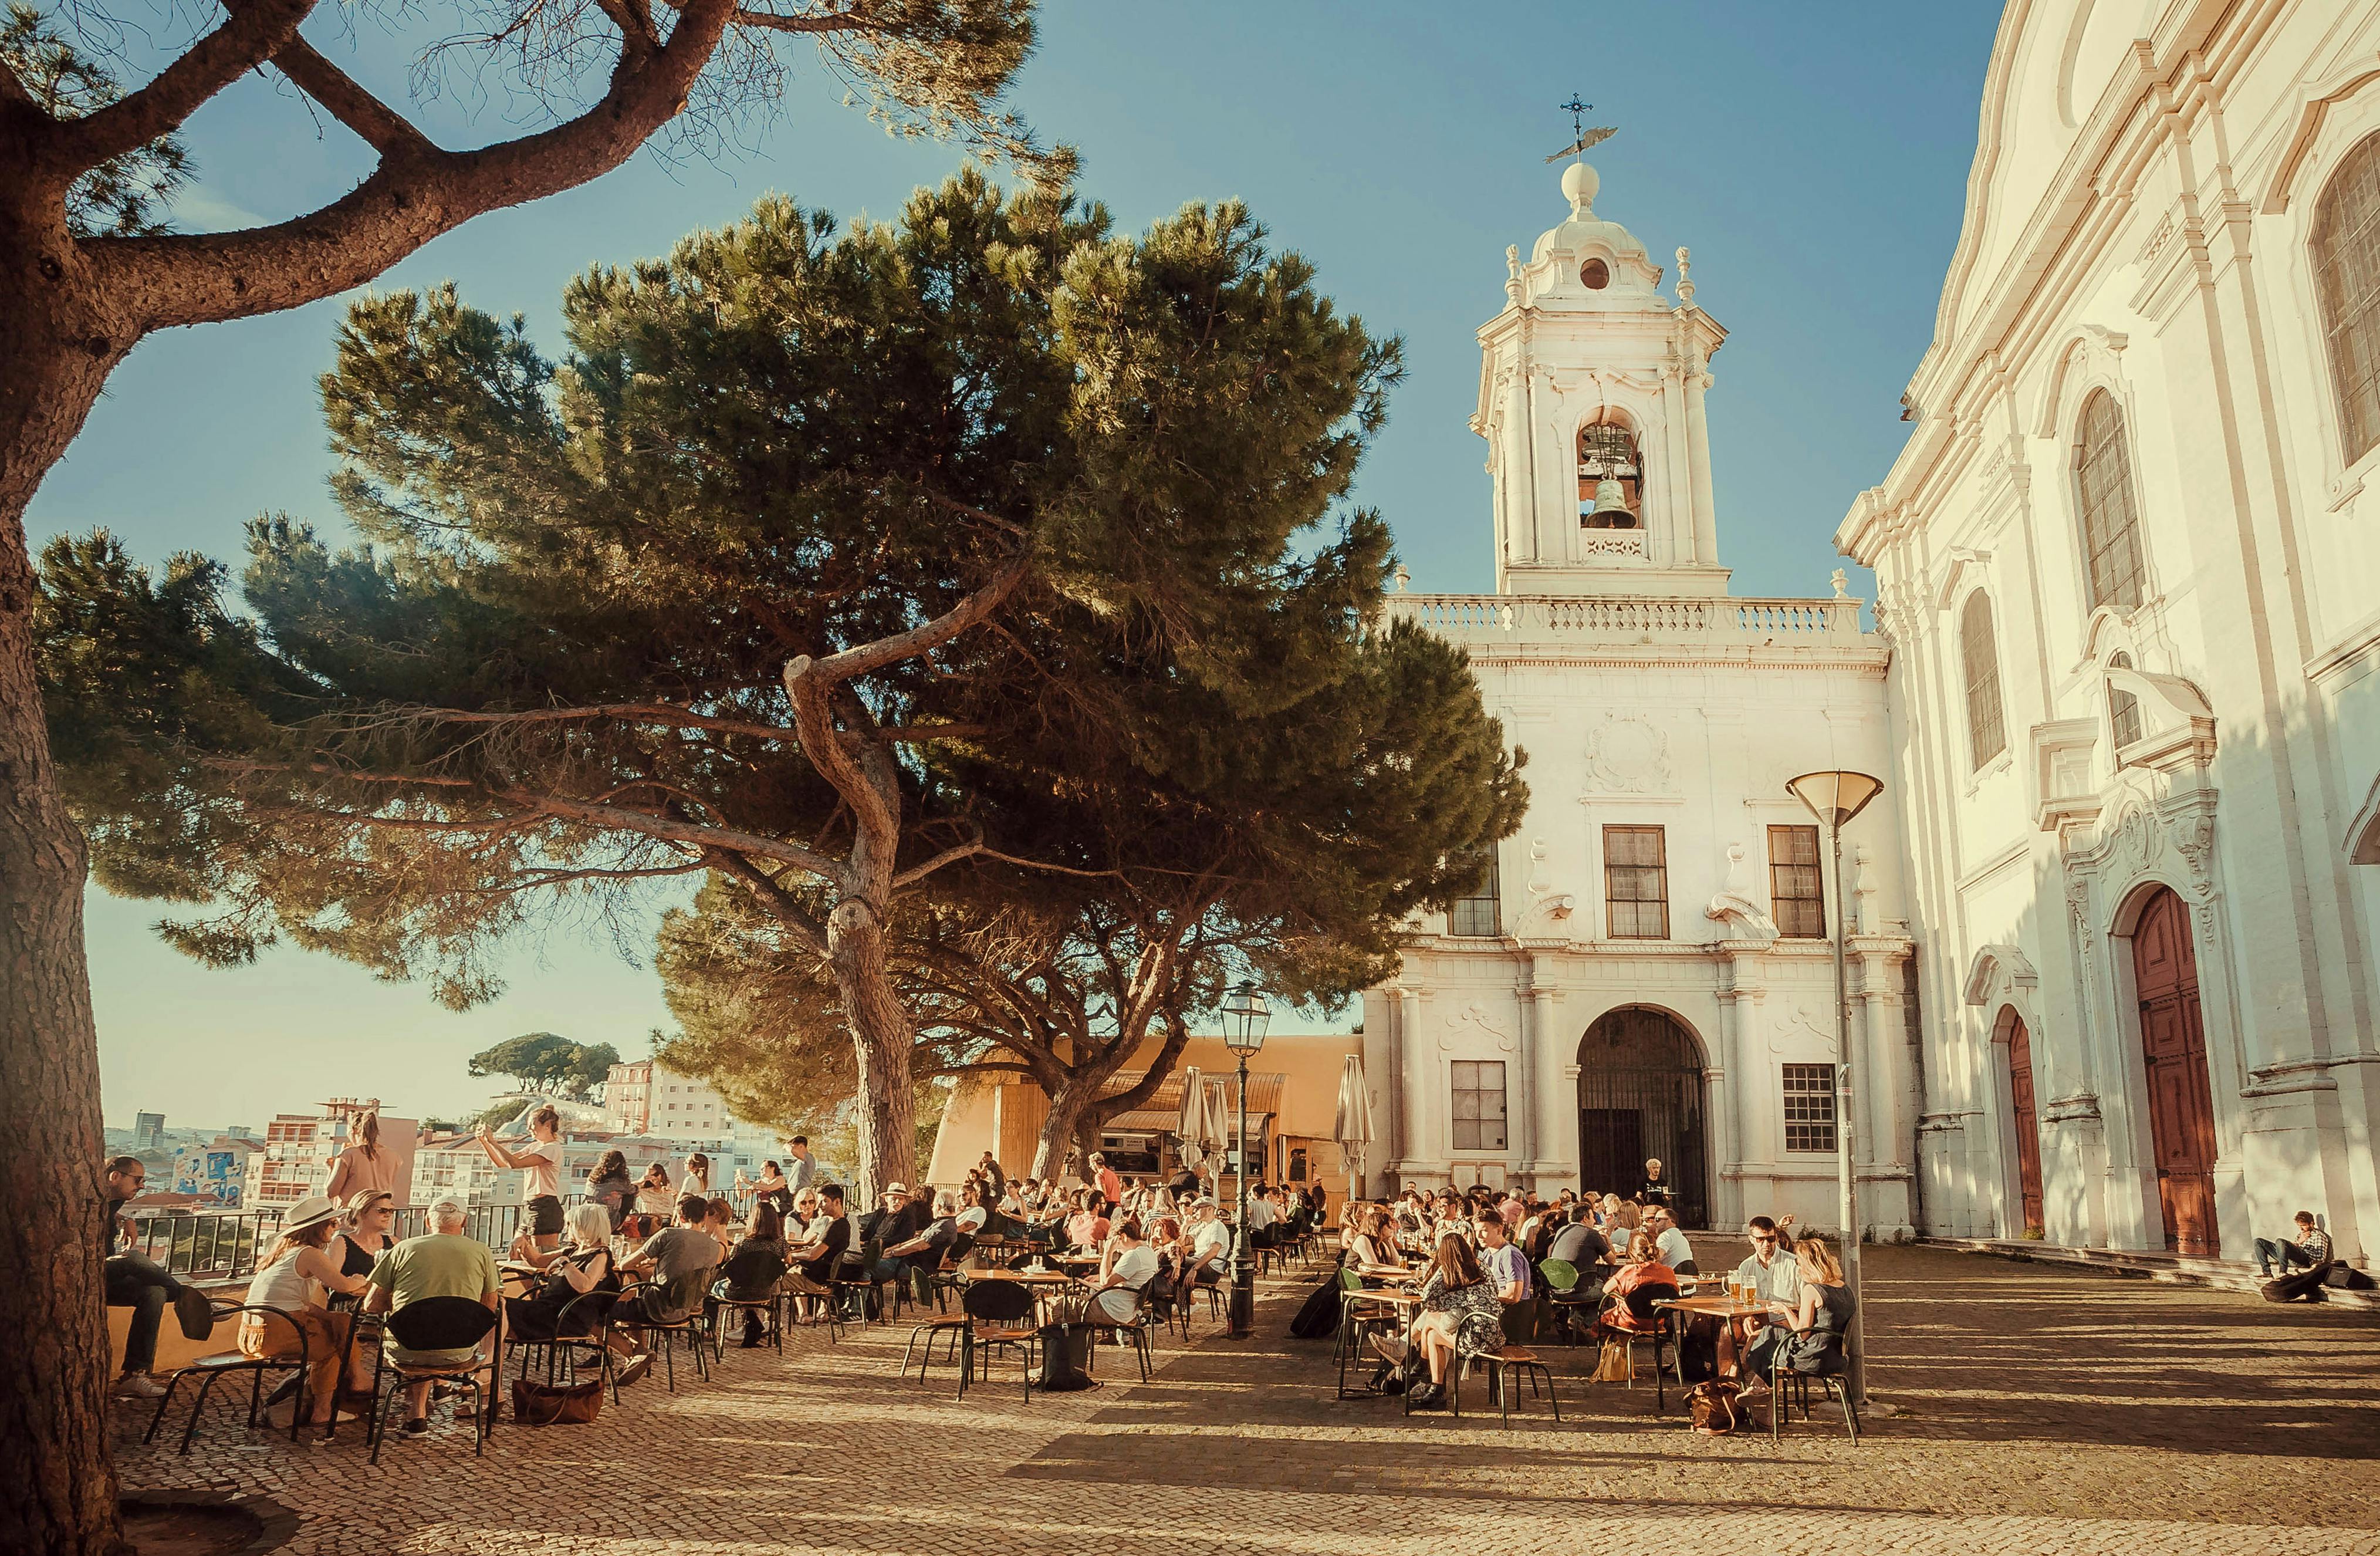 Lisbon is a city full of old-world charm and lively spaces